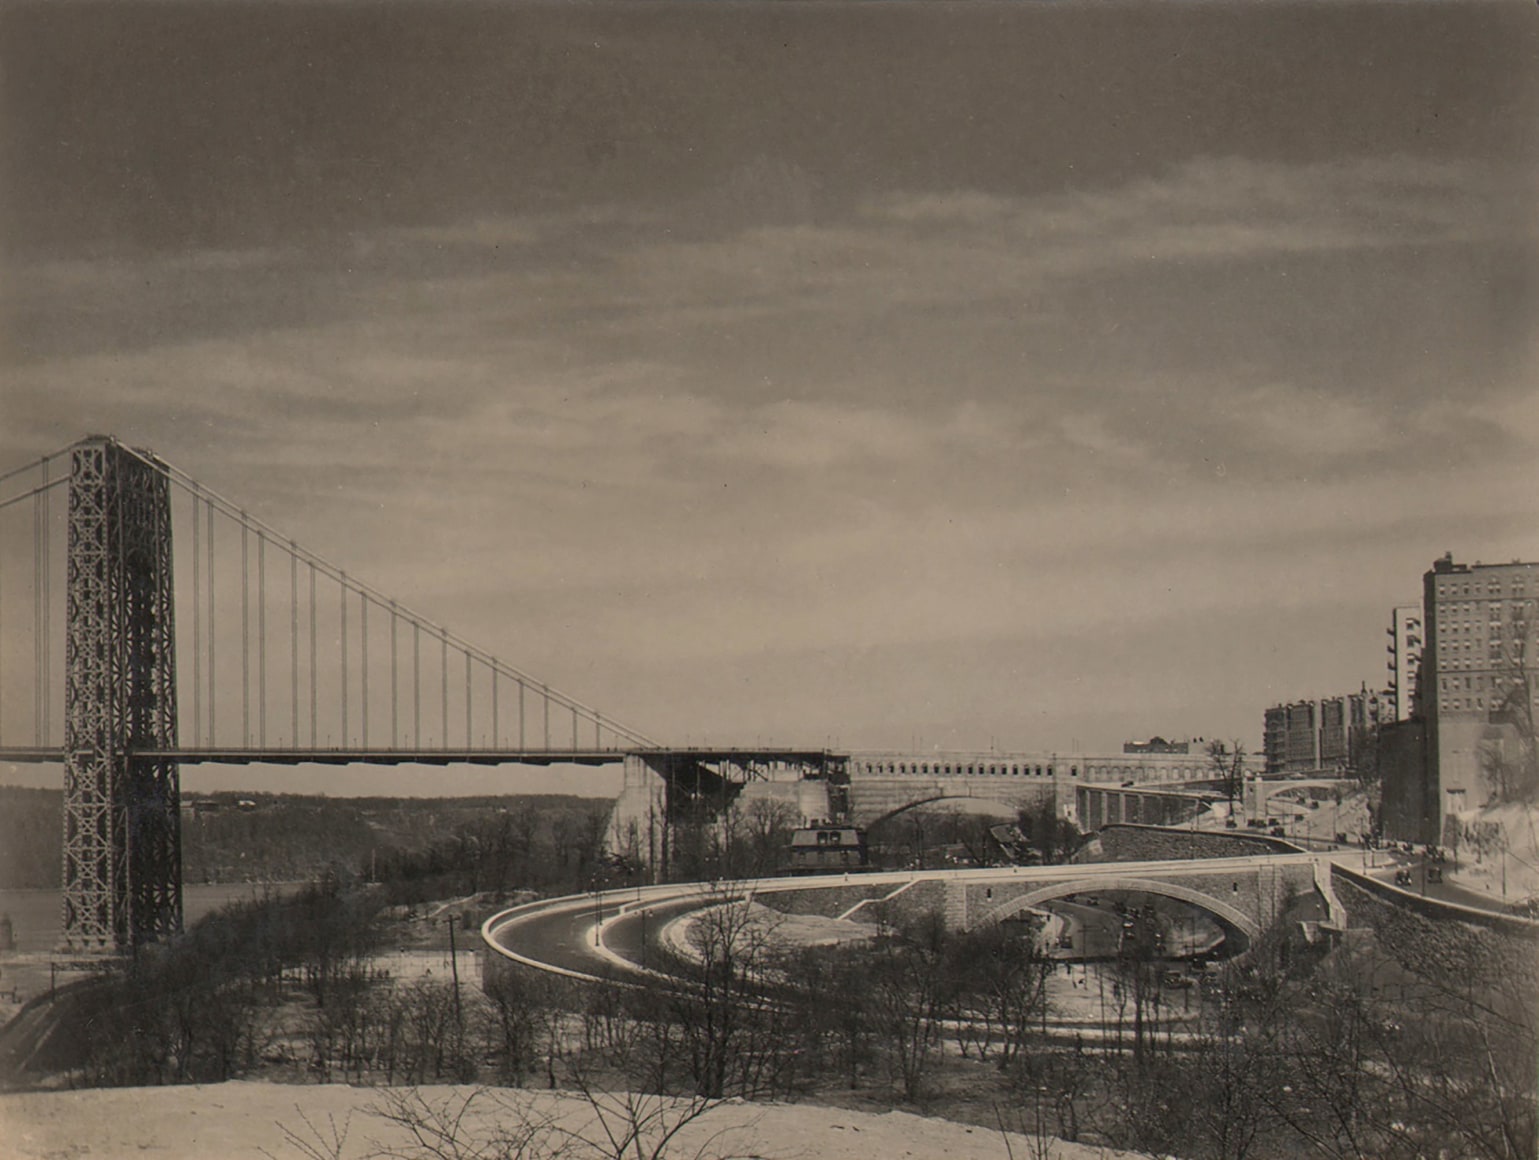 Paul J. Woolf, George Washington Bridge, c. 1933. Cityscape with bridge on center left of the frame. Cloudy sky above. A few buildings are visible on the far right.